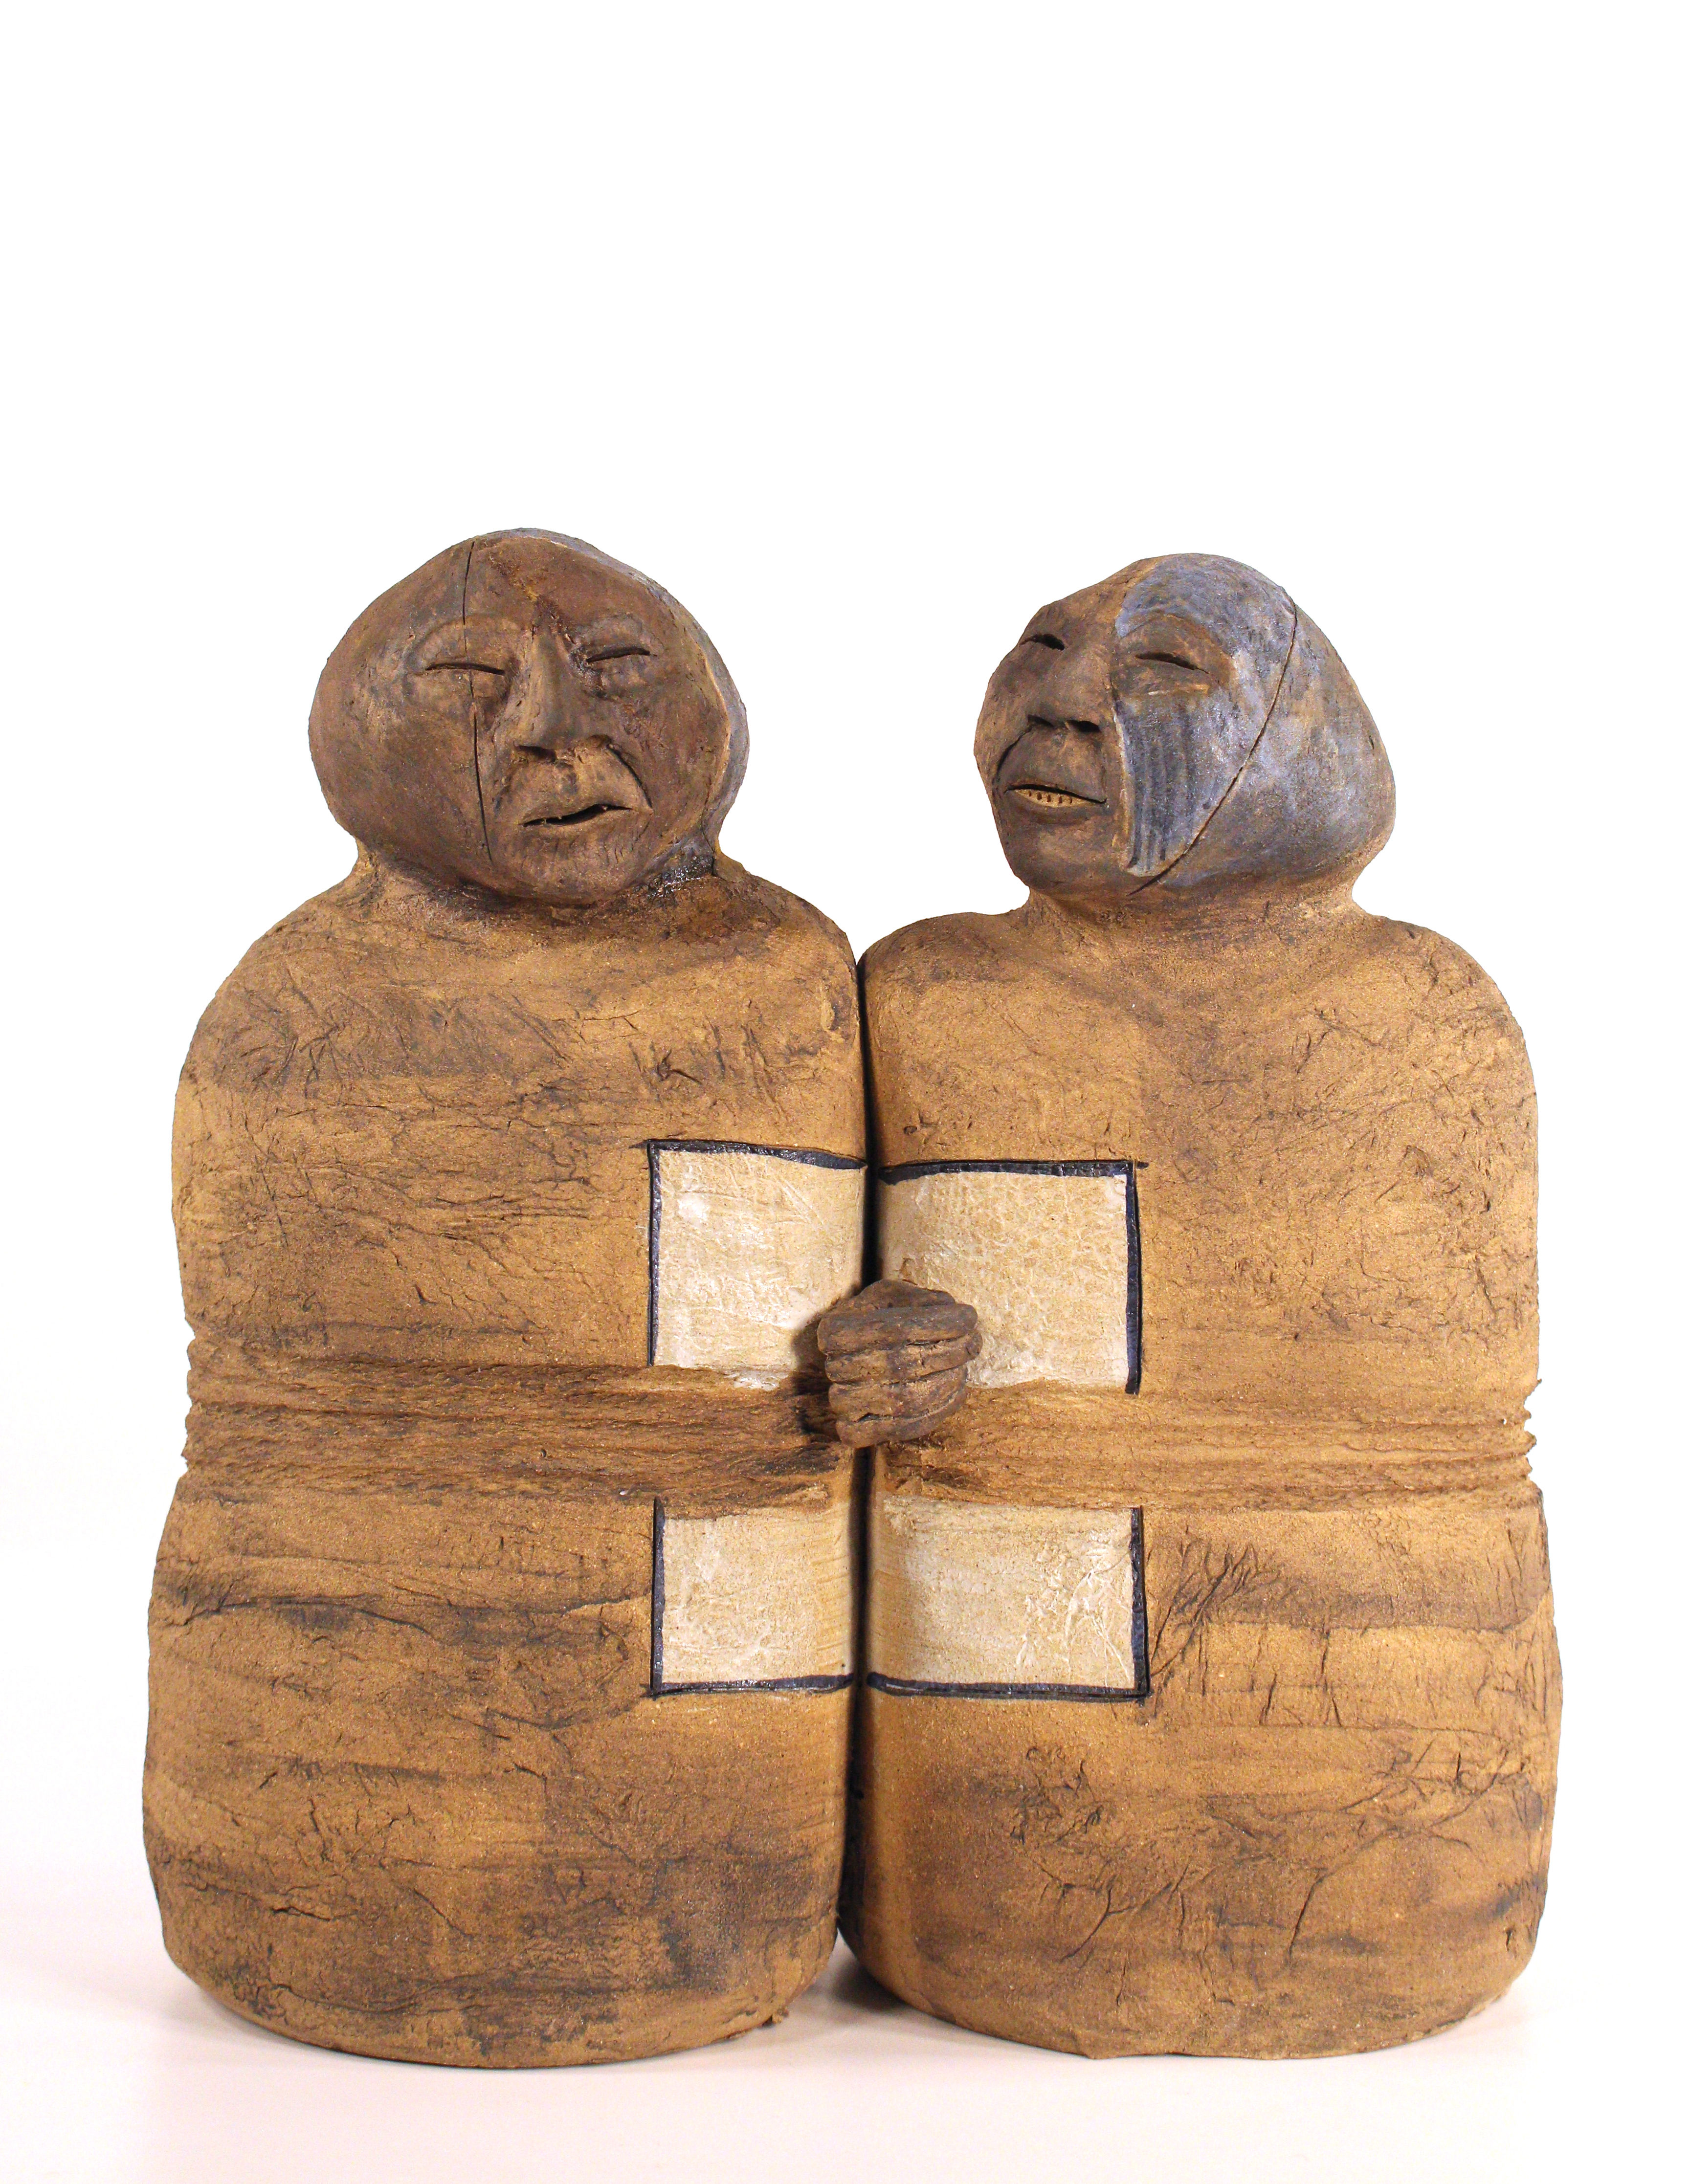 Ceramic abstract figures adjacent to each other, holding hands